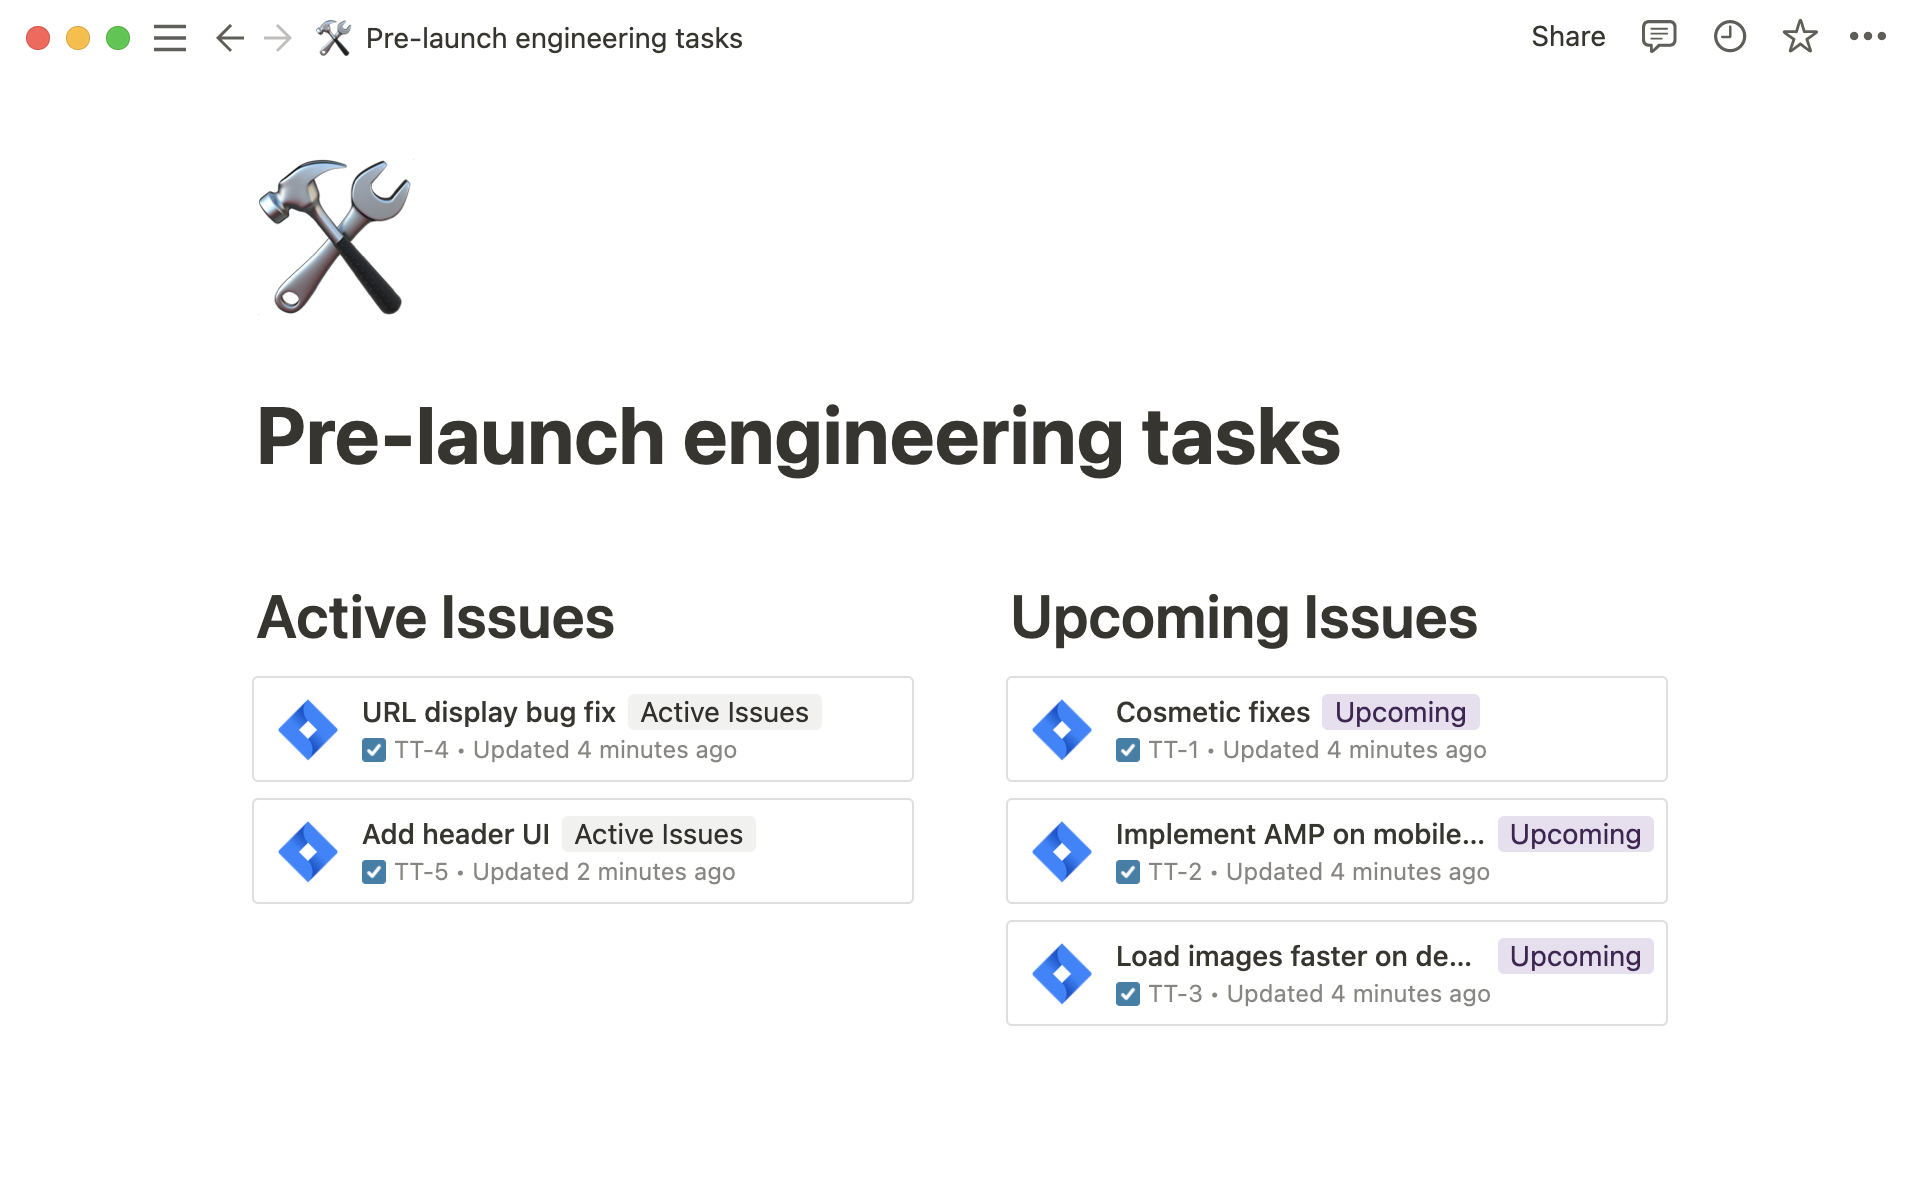 Engineering teams can get live previews of Jira tasks right in Notion.